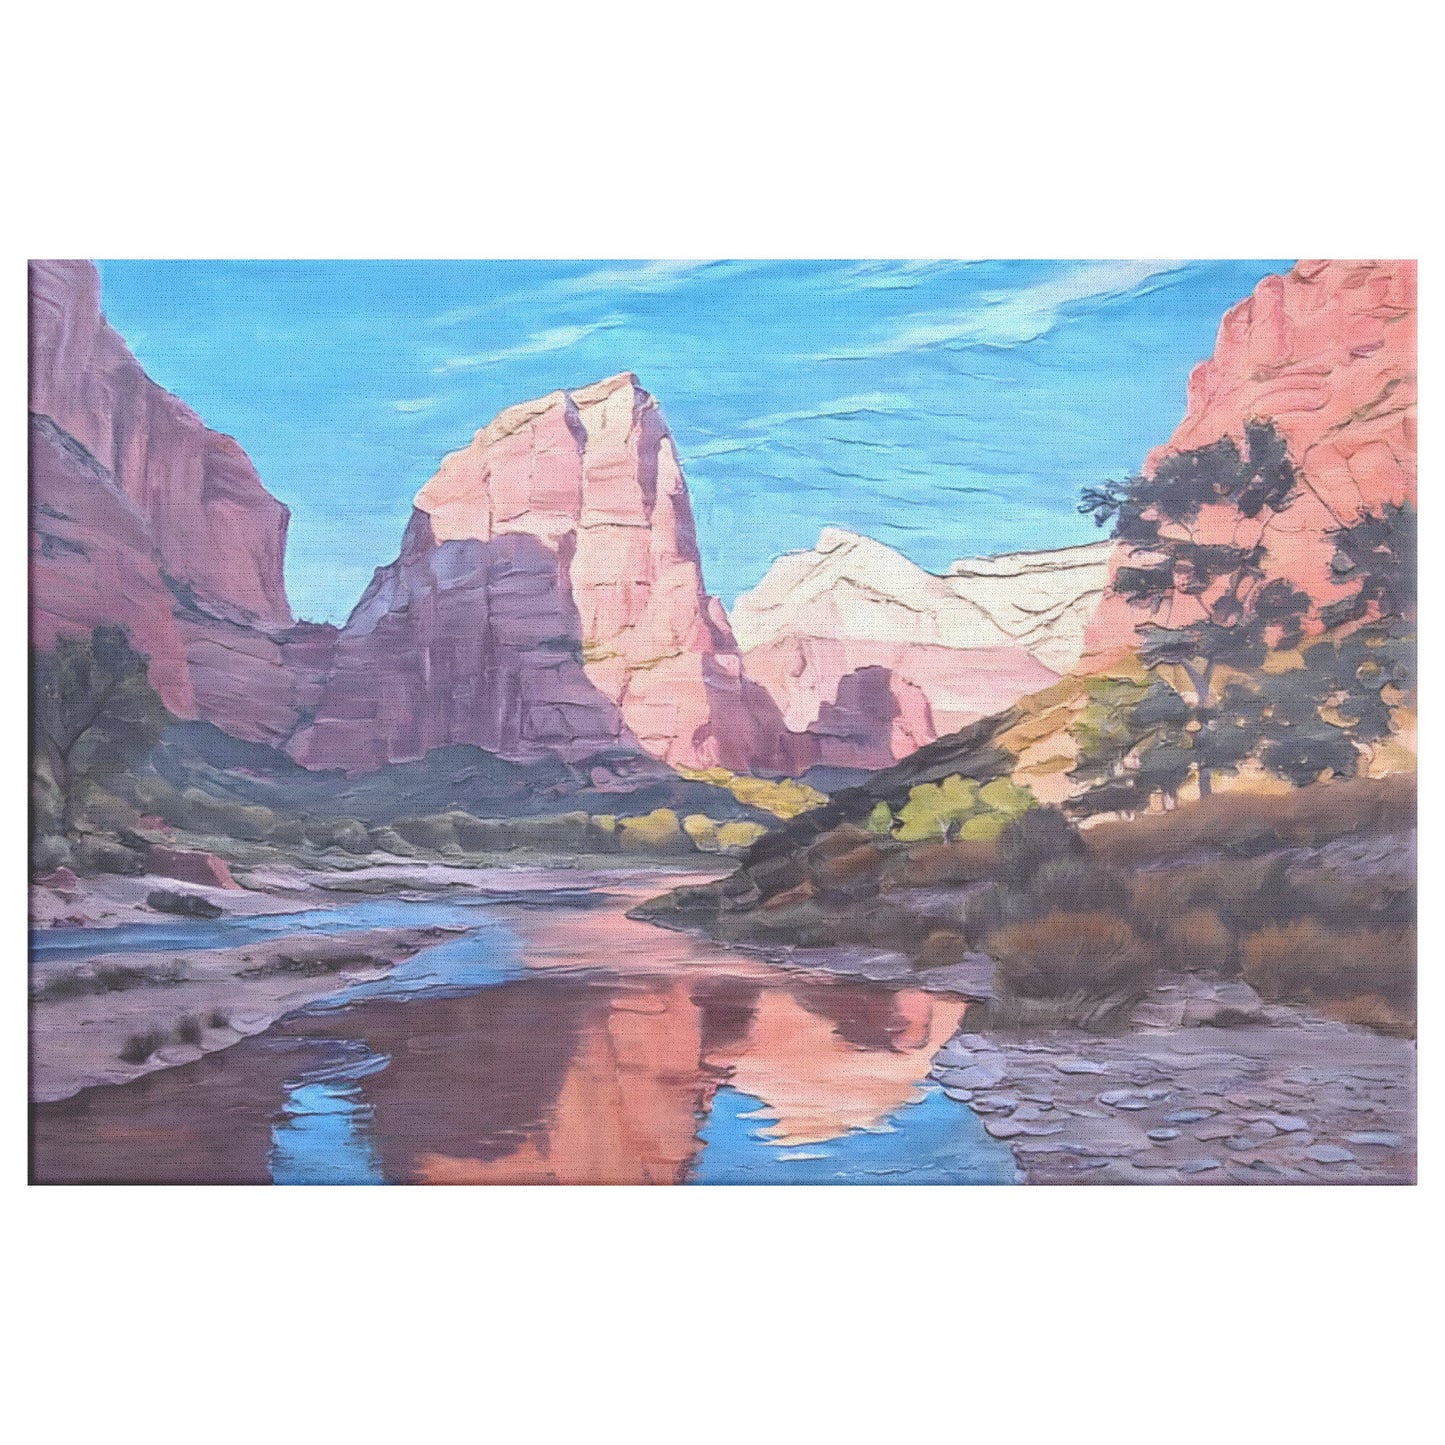 Western Landscape Oil Painting, Impressionist Painting of Angel's Landing